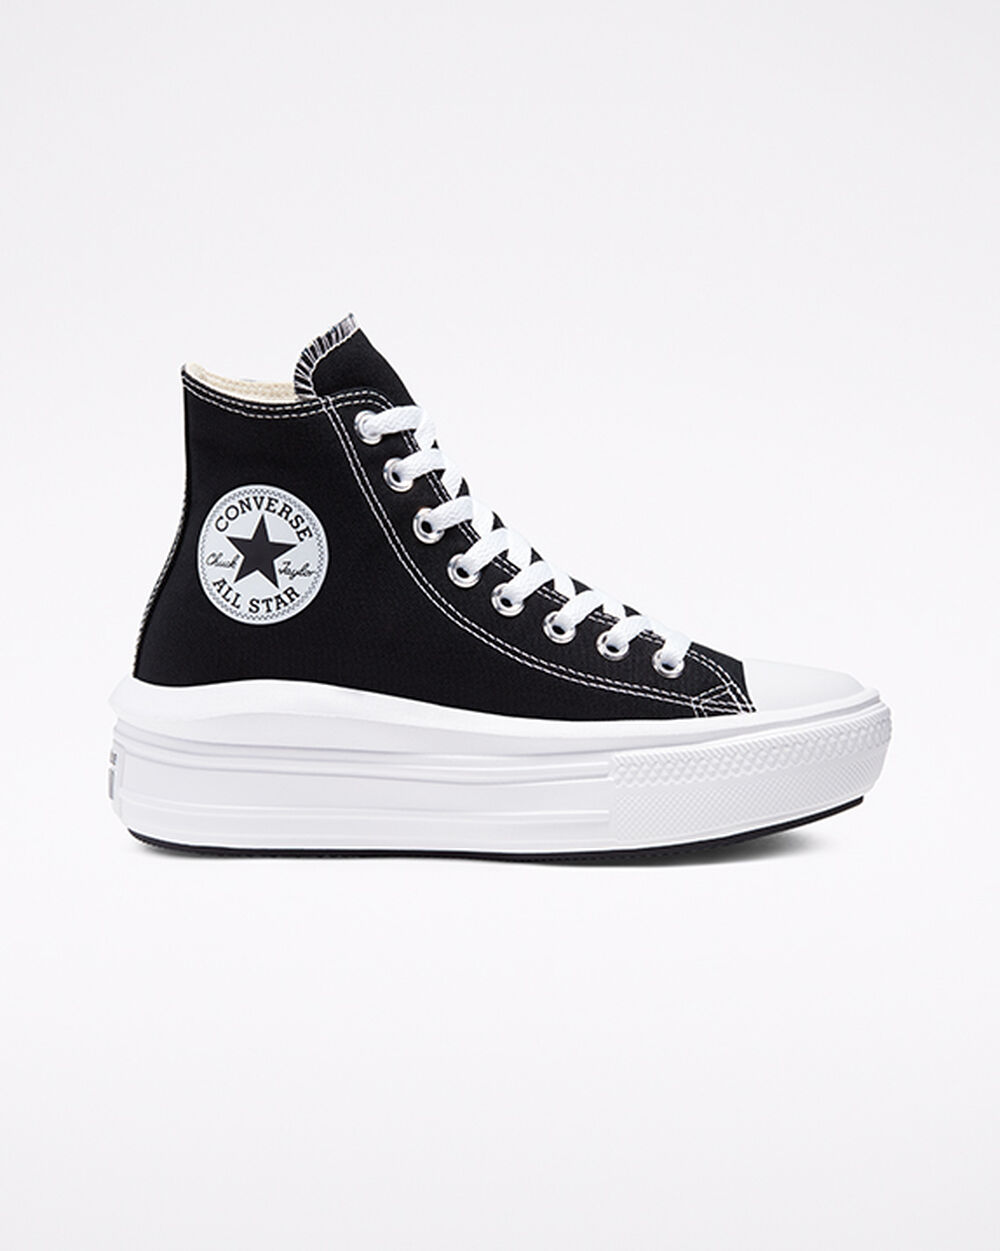 Tenis Converse Chuck Taylor All Star Move Mujer Negros Beige Blancos | Mexico-534106